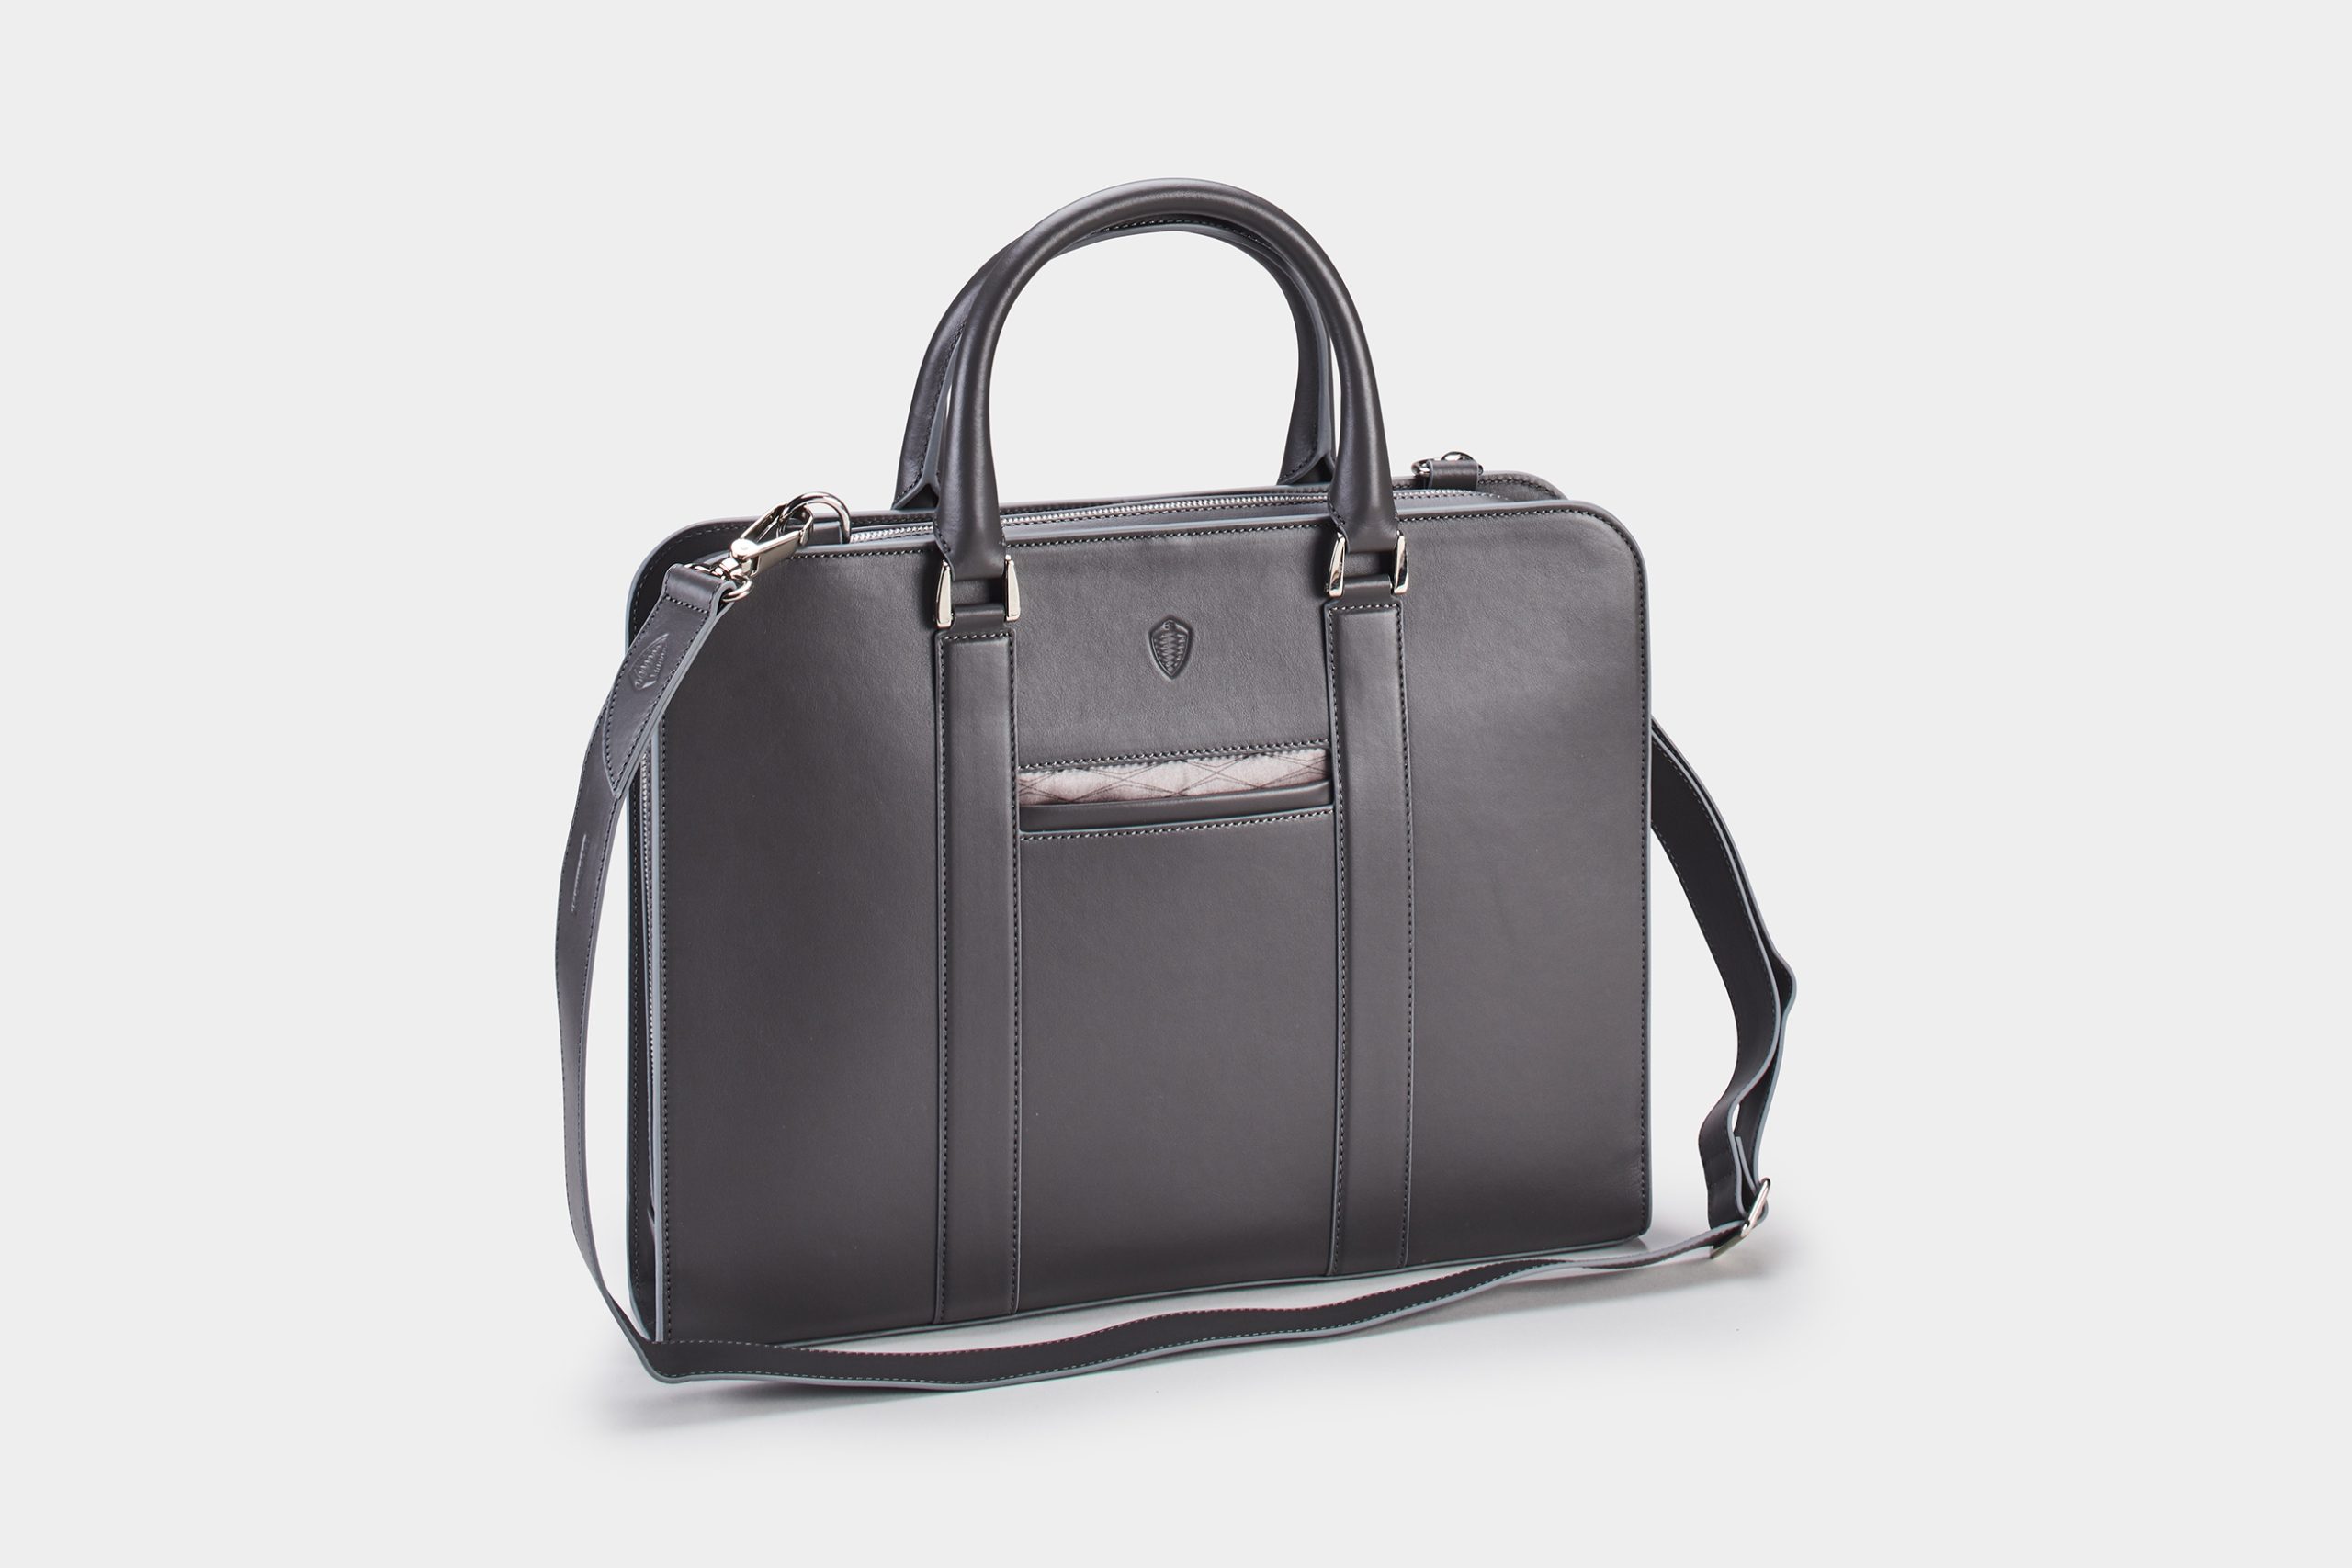 Briefcase in grey leather